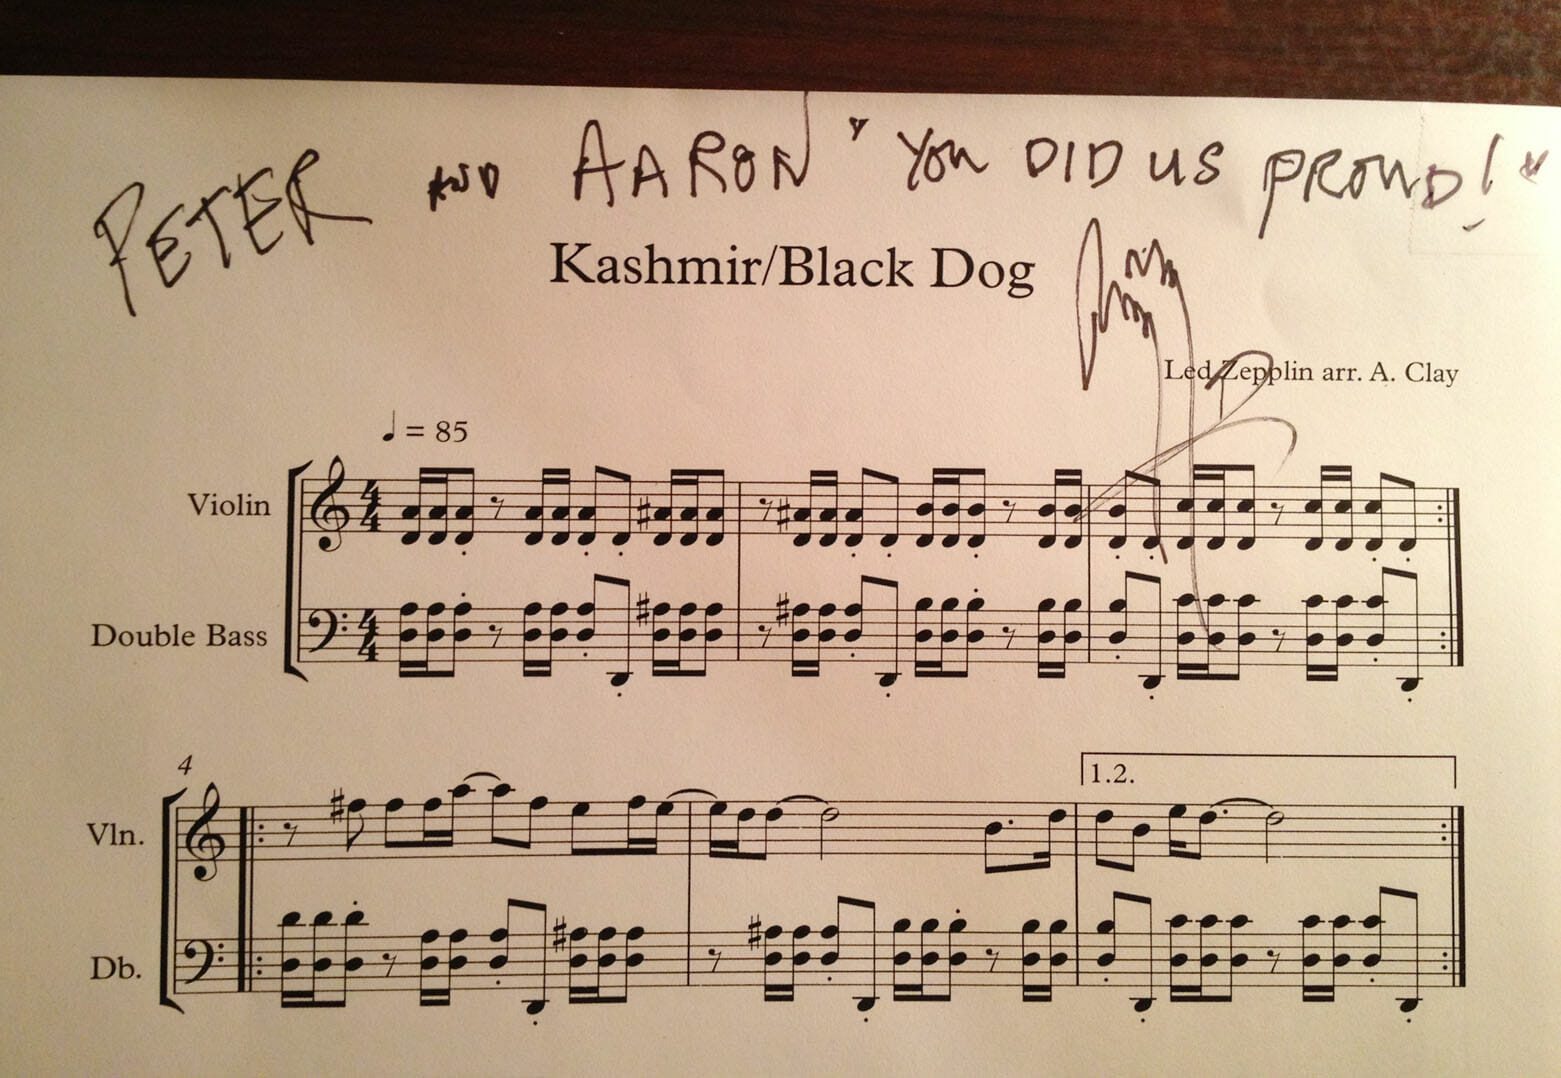 Sheet music signed by Led Zeppelin's Jimmy Page